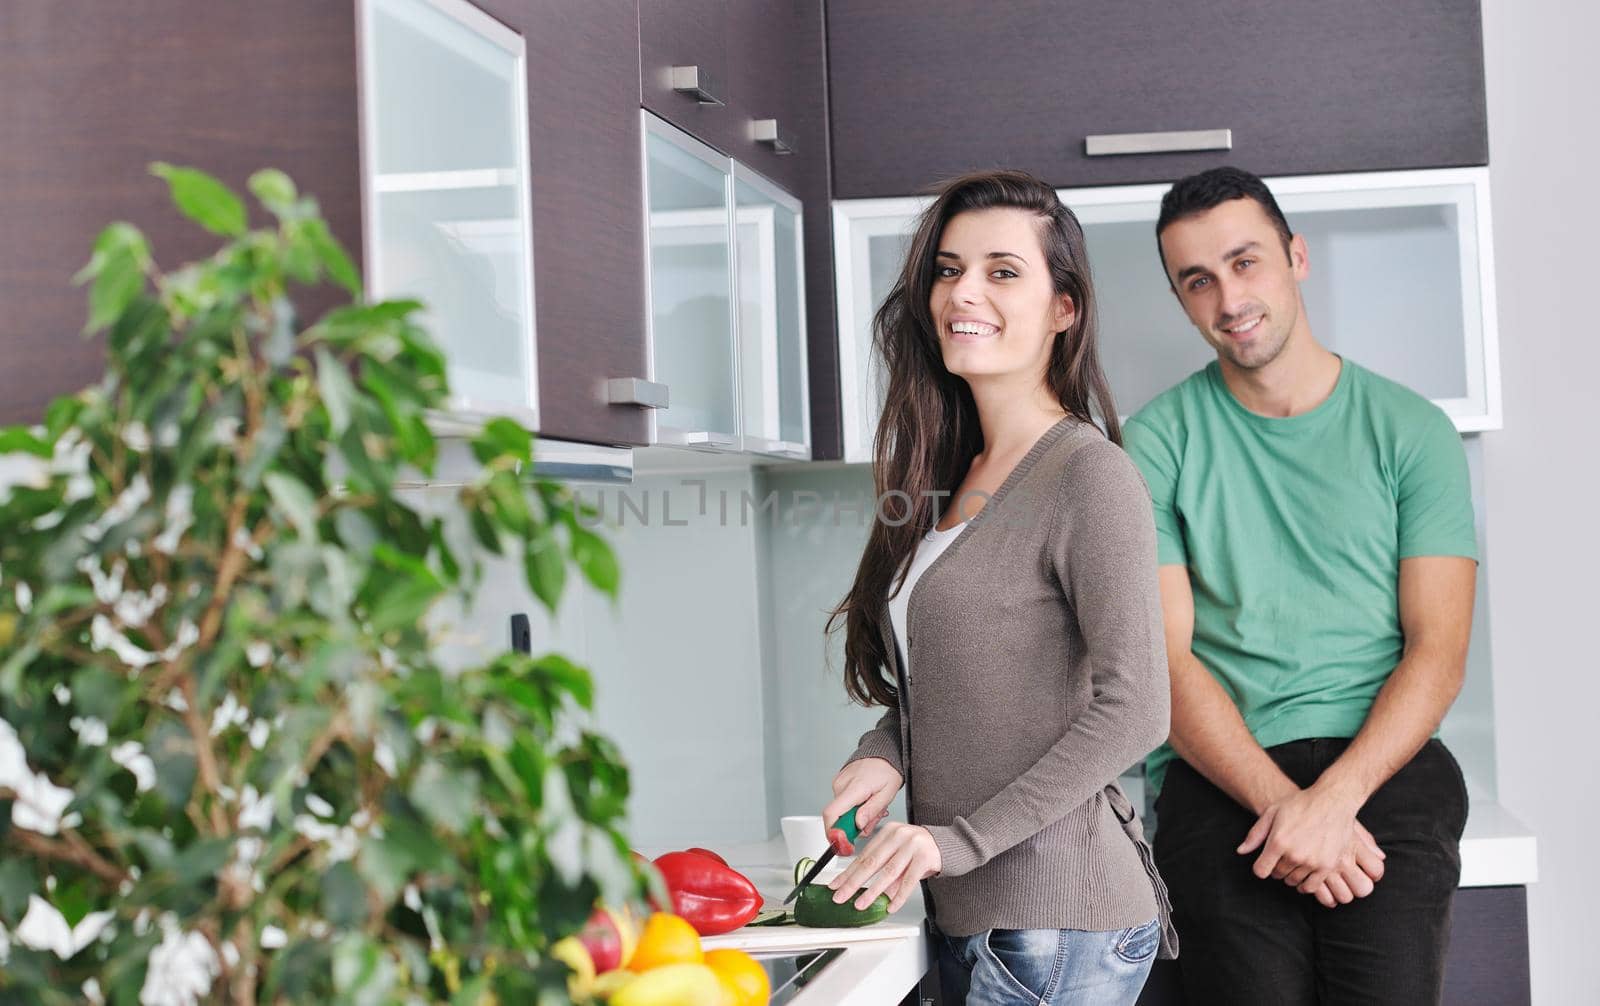 young couple have fun in modern kitchen by dotshock